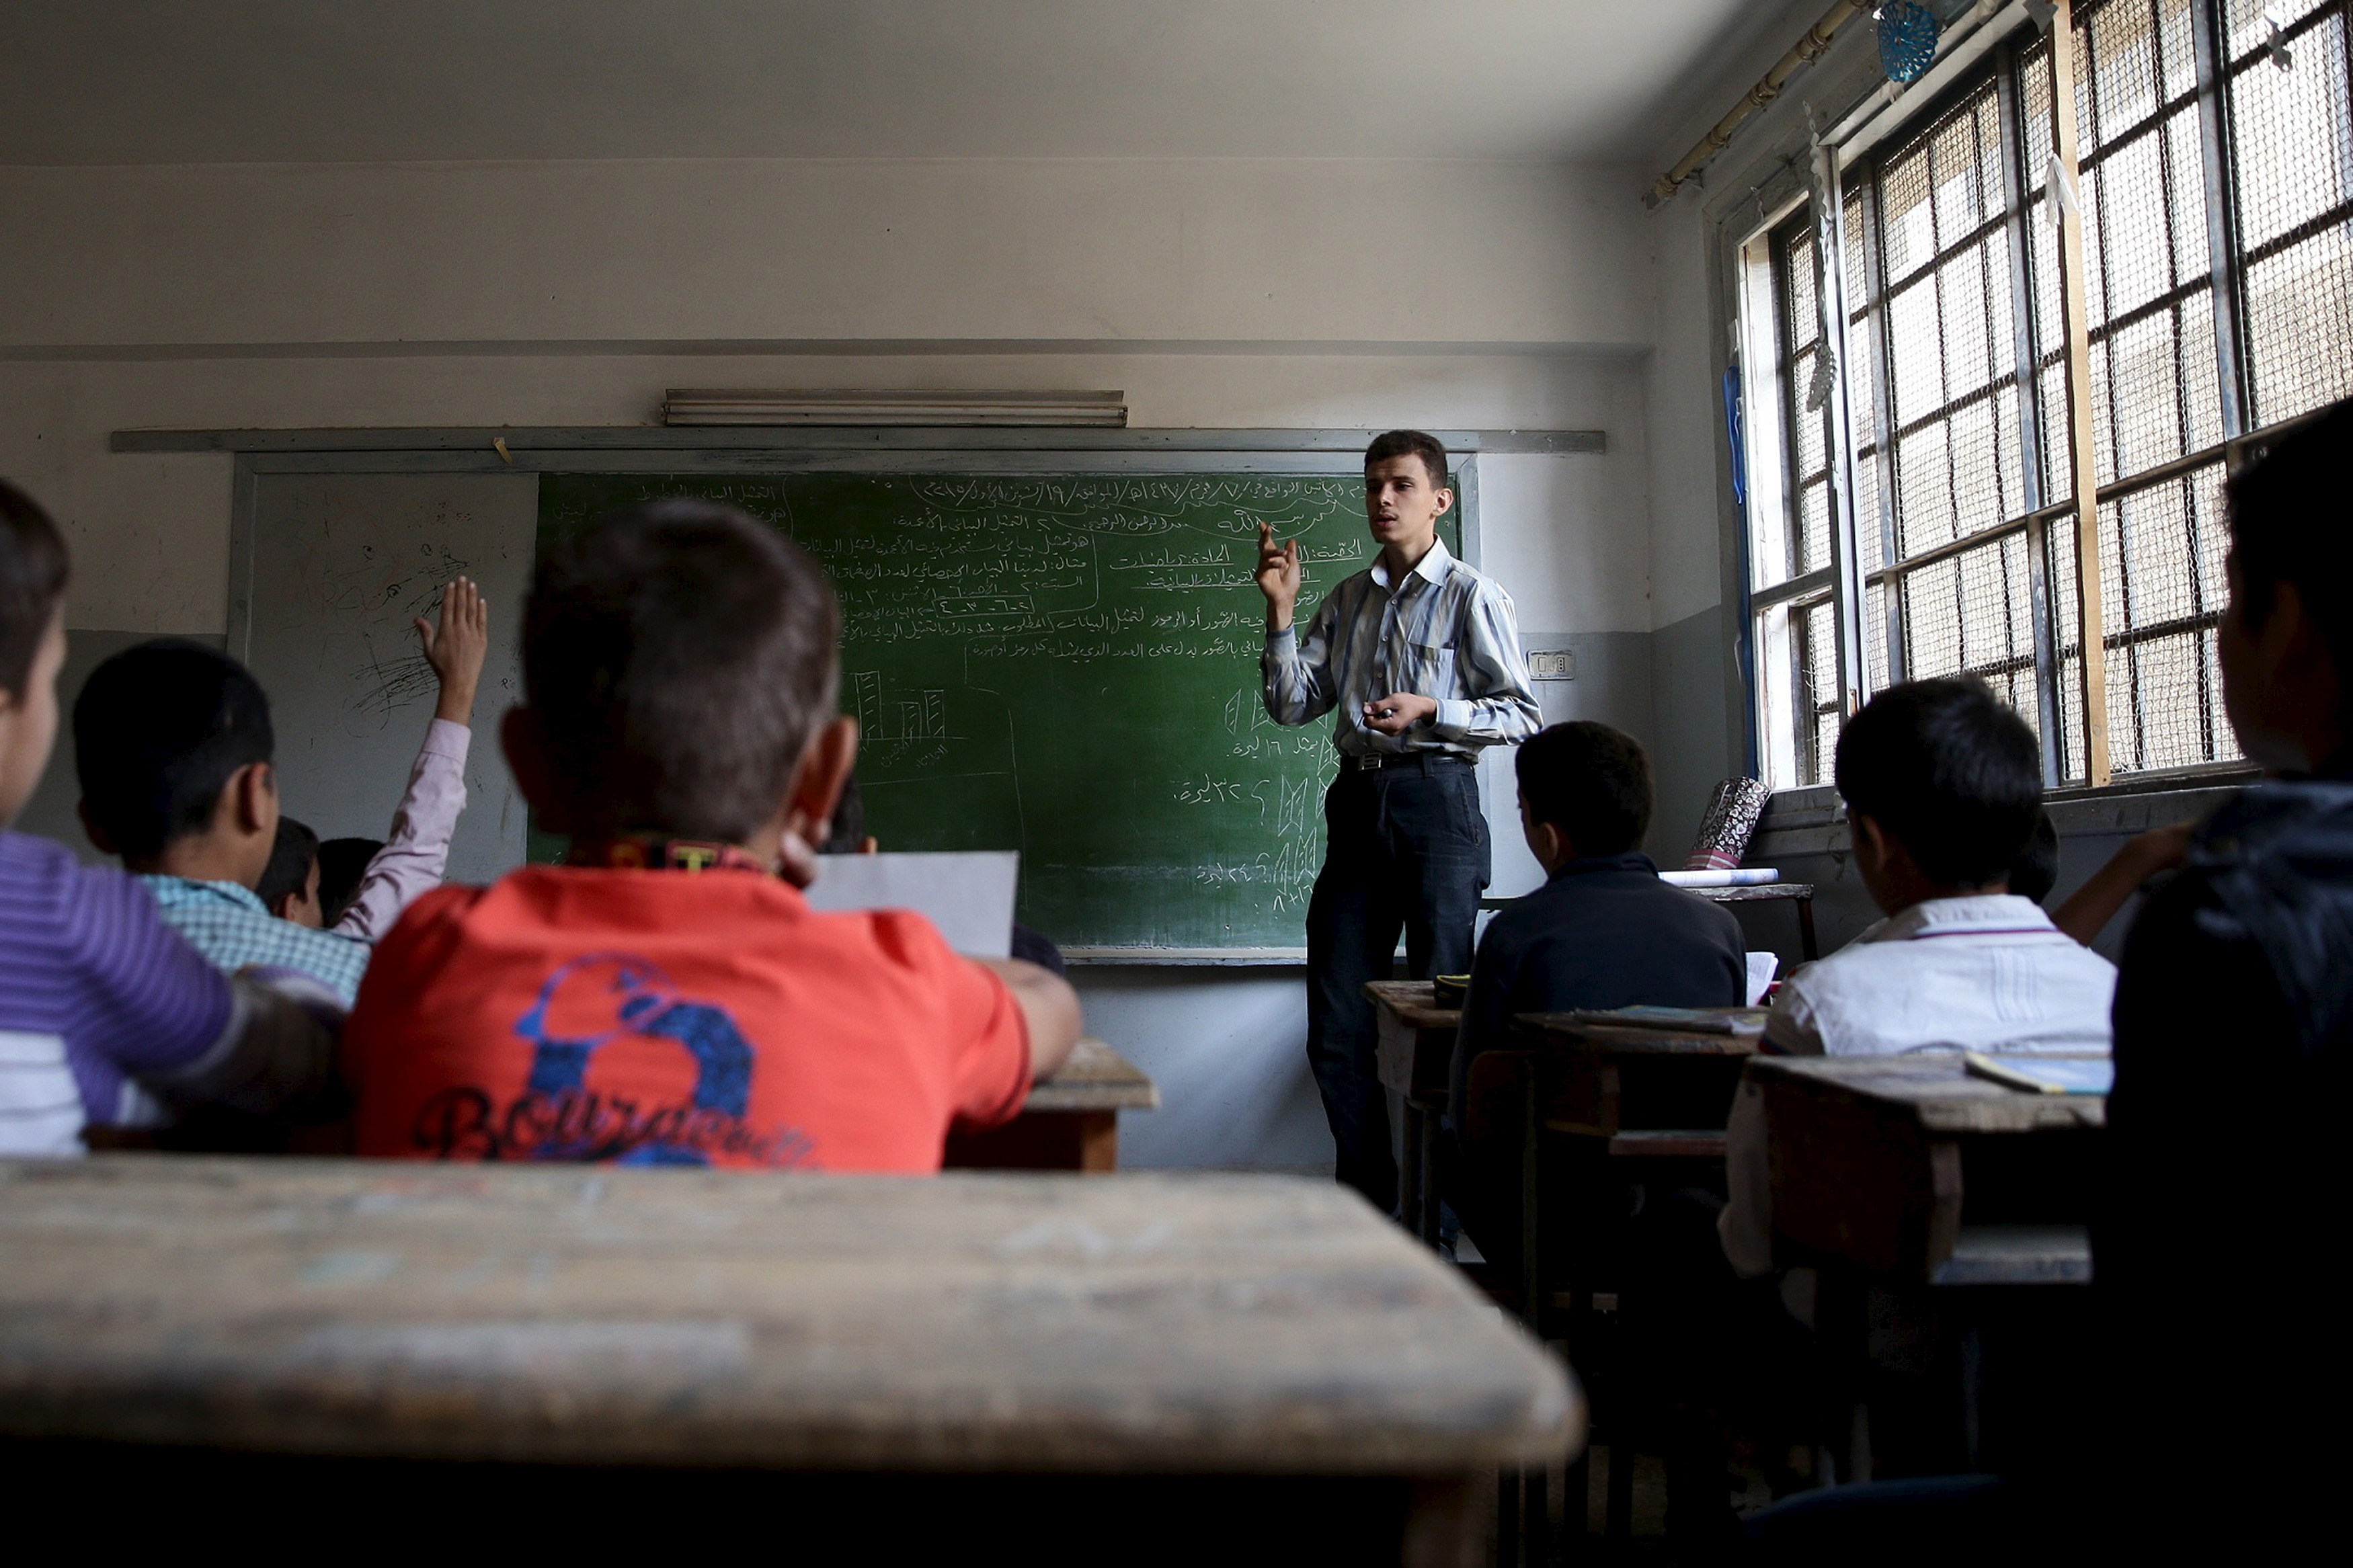 Students attend a class inside a school in a rebel-controlled area of the eastern Ghouta of Damascus, Syria October 19, 2015. The new school year in eastern Ghouta of Damascus was postponed several time this year due to airstrikes by forces loyal to Syria's President Bashar al-Assad on the area in the last weeks, activists said. REUTERS/Bassam Khabieh  - GF10000250802